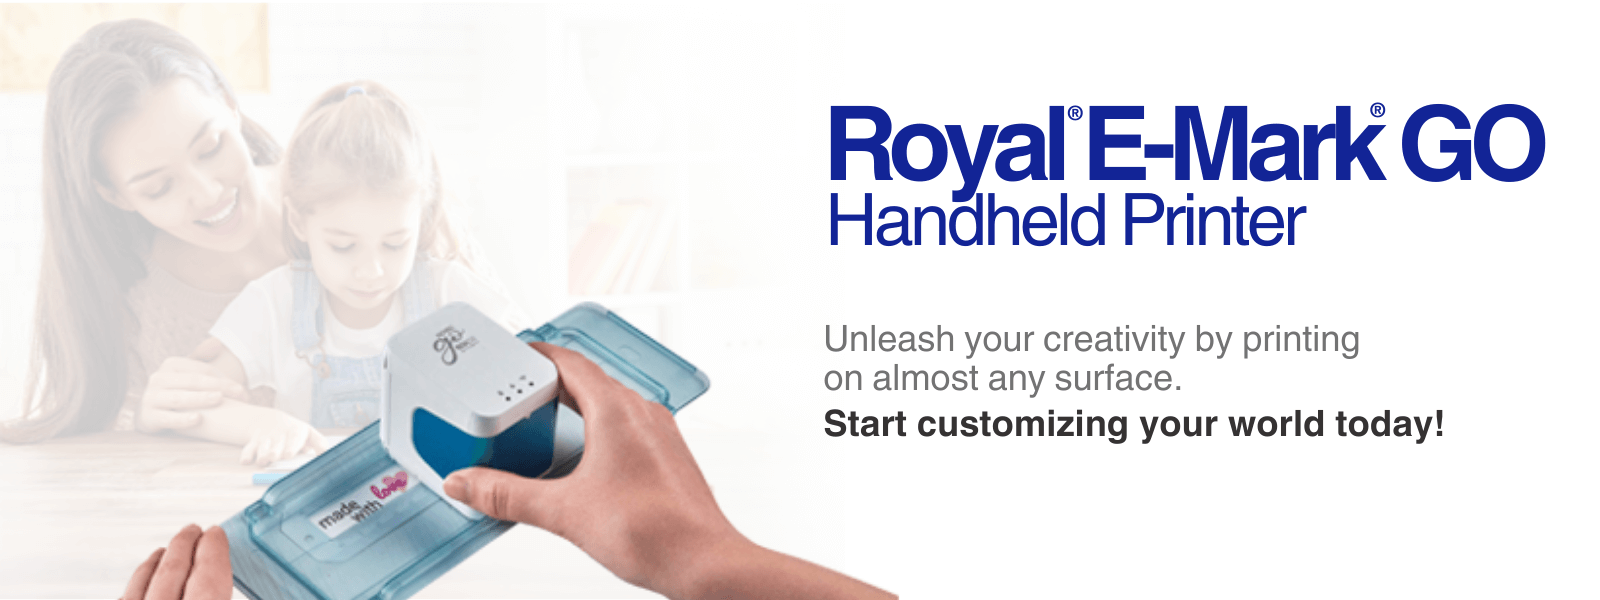 Royal  Over 120 years bringing the highest quality consumer products